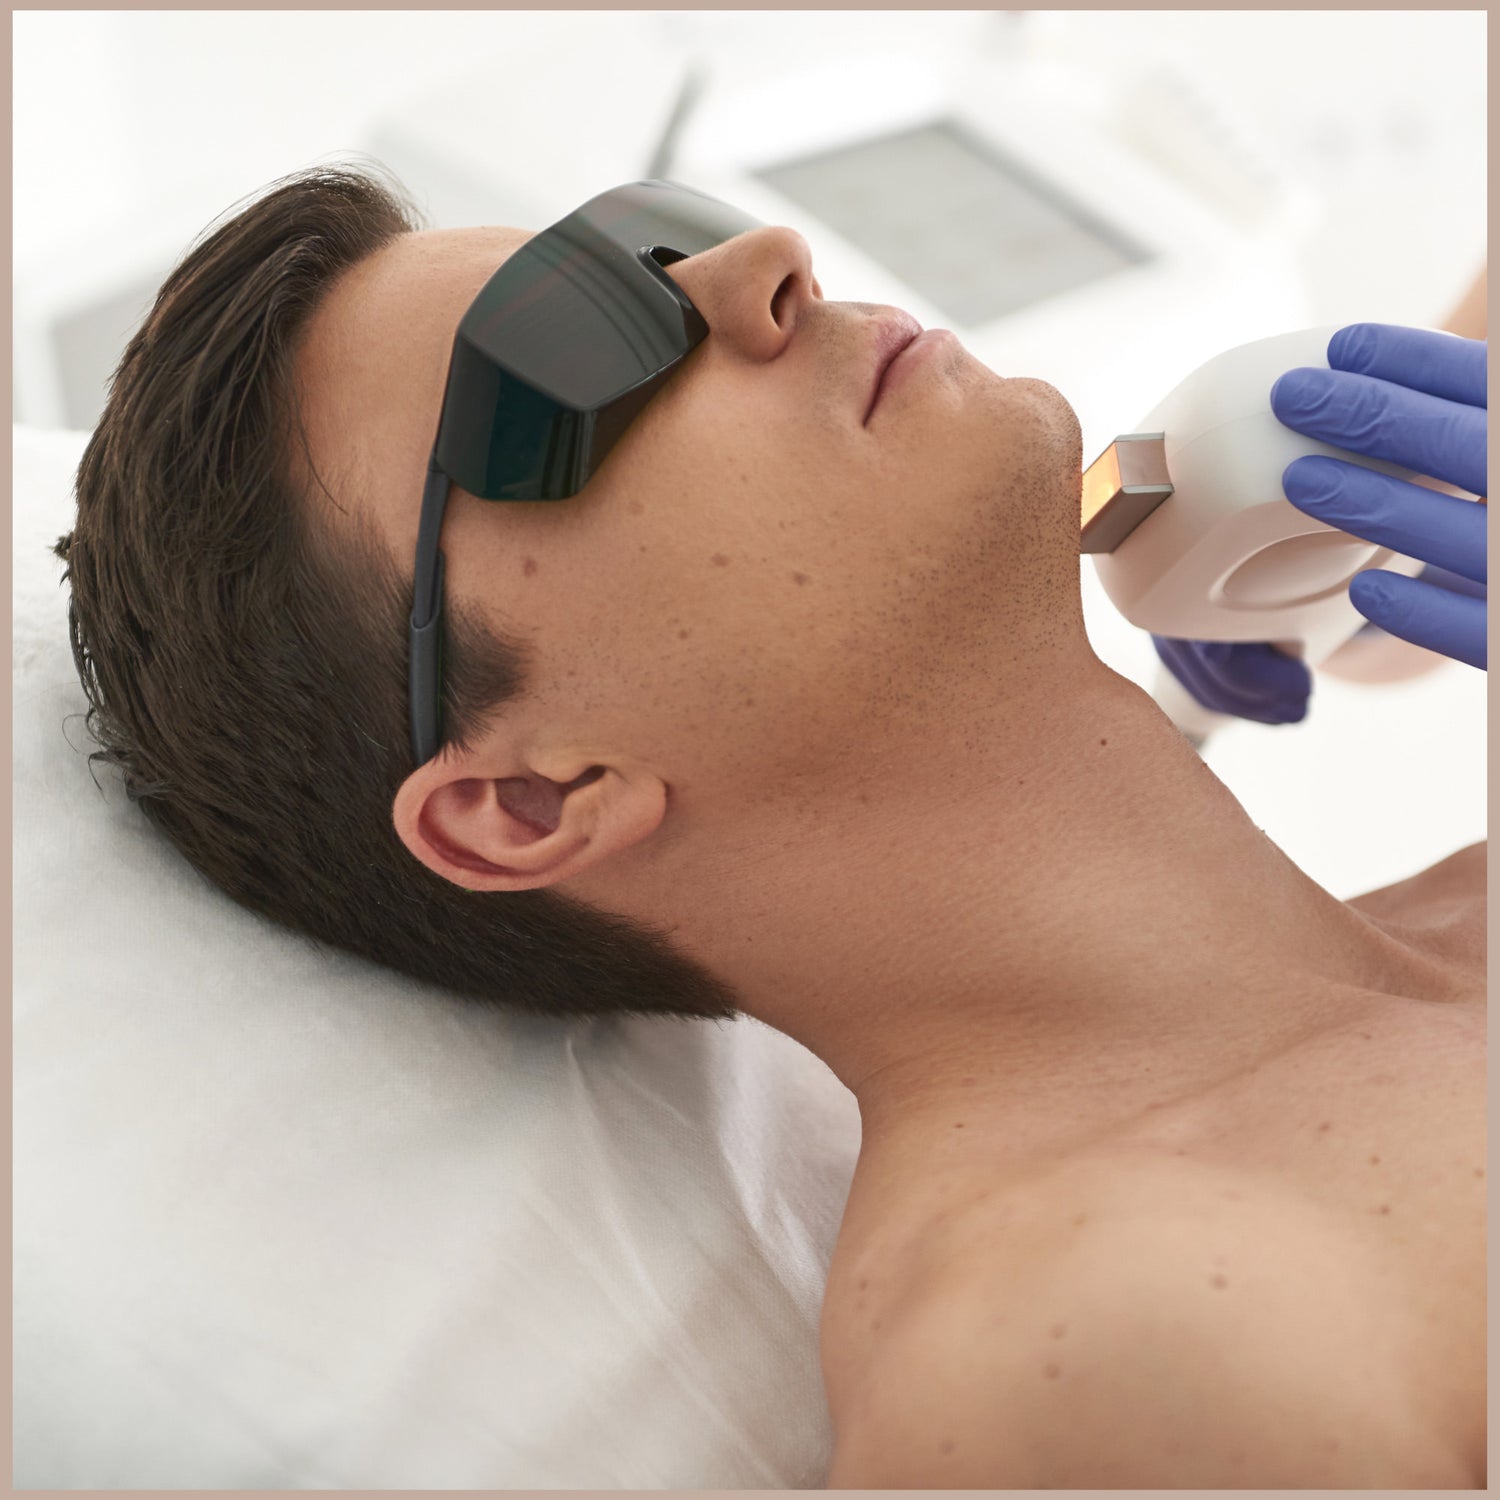 man wearing protective glasses getting laser removal on his chin